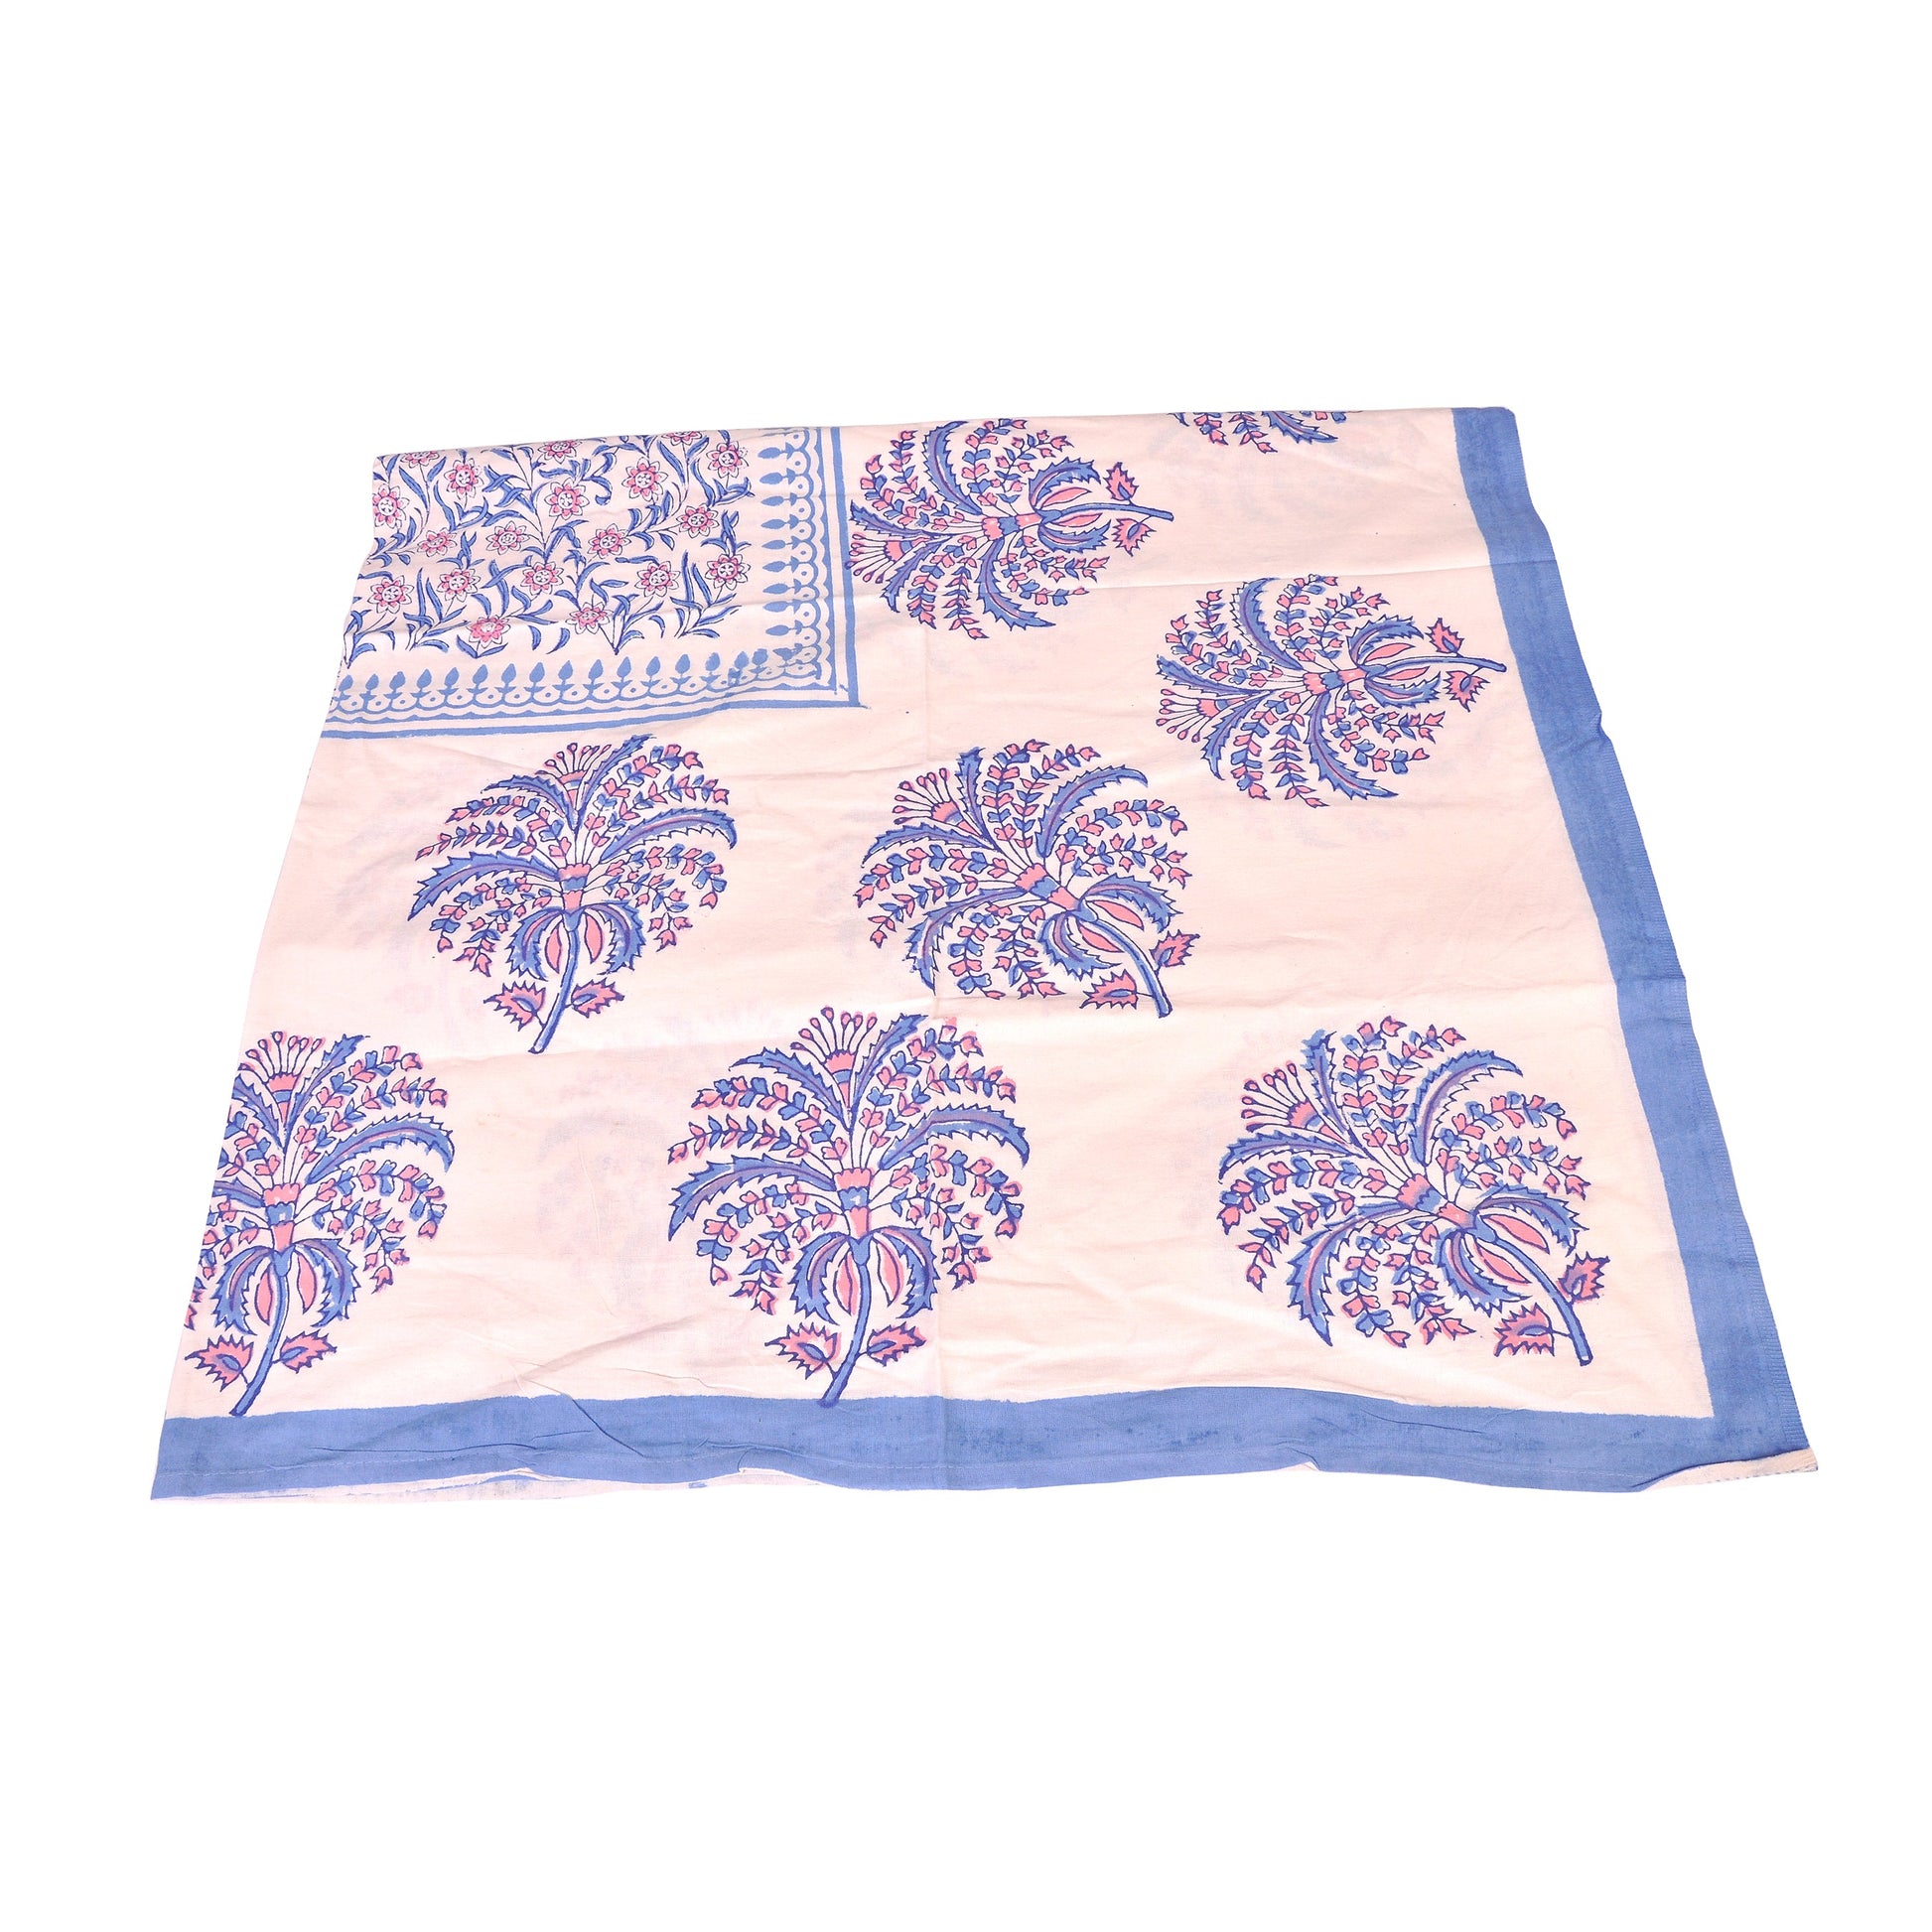 Block-printed Blue and Pink Floral Spray Cotton Tablecloth 